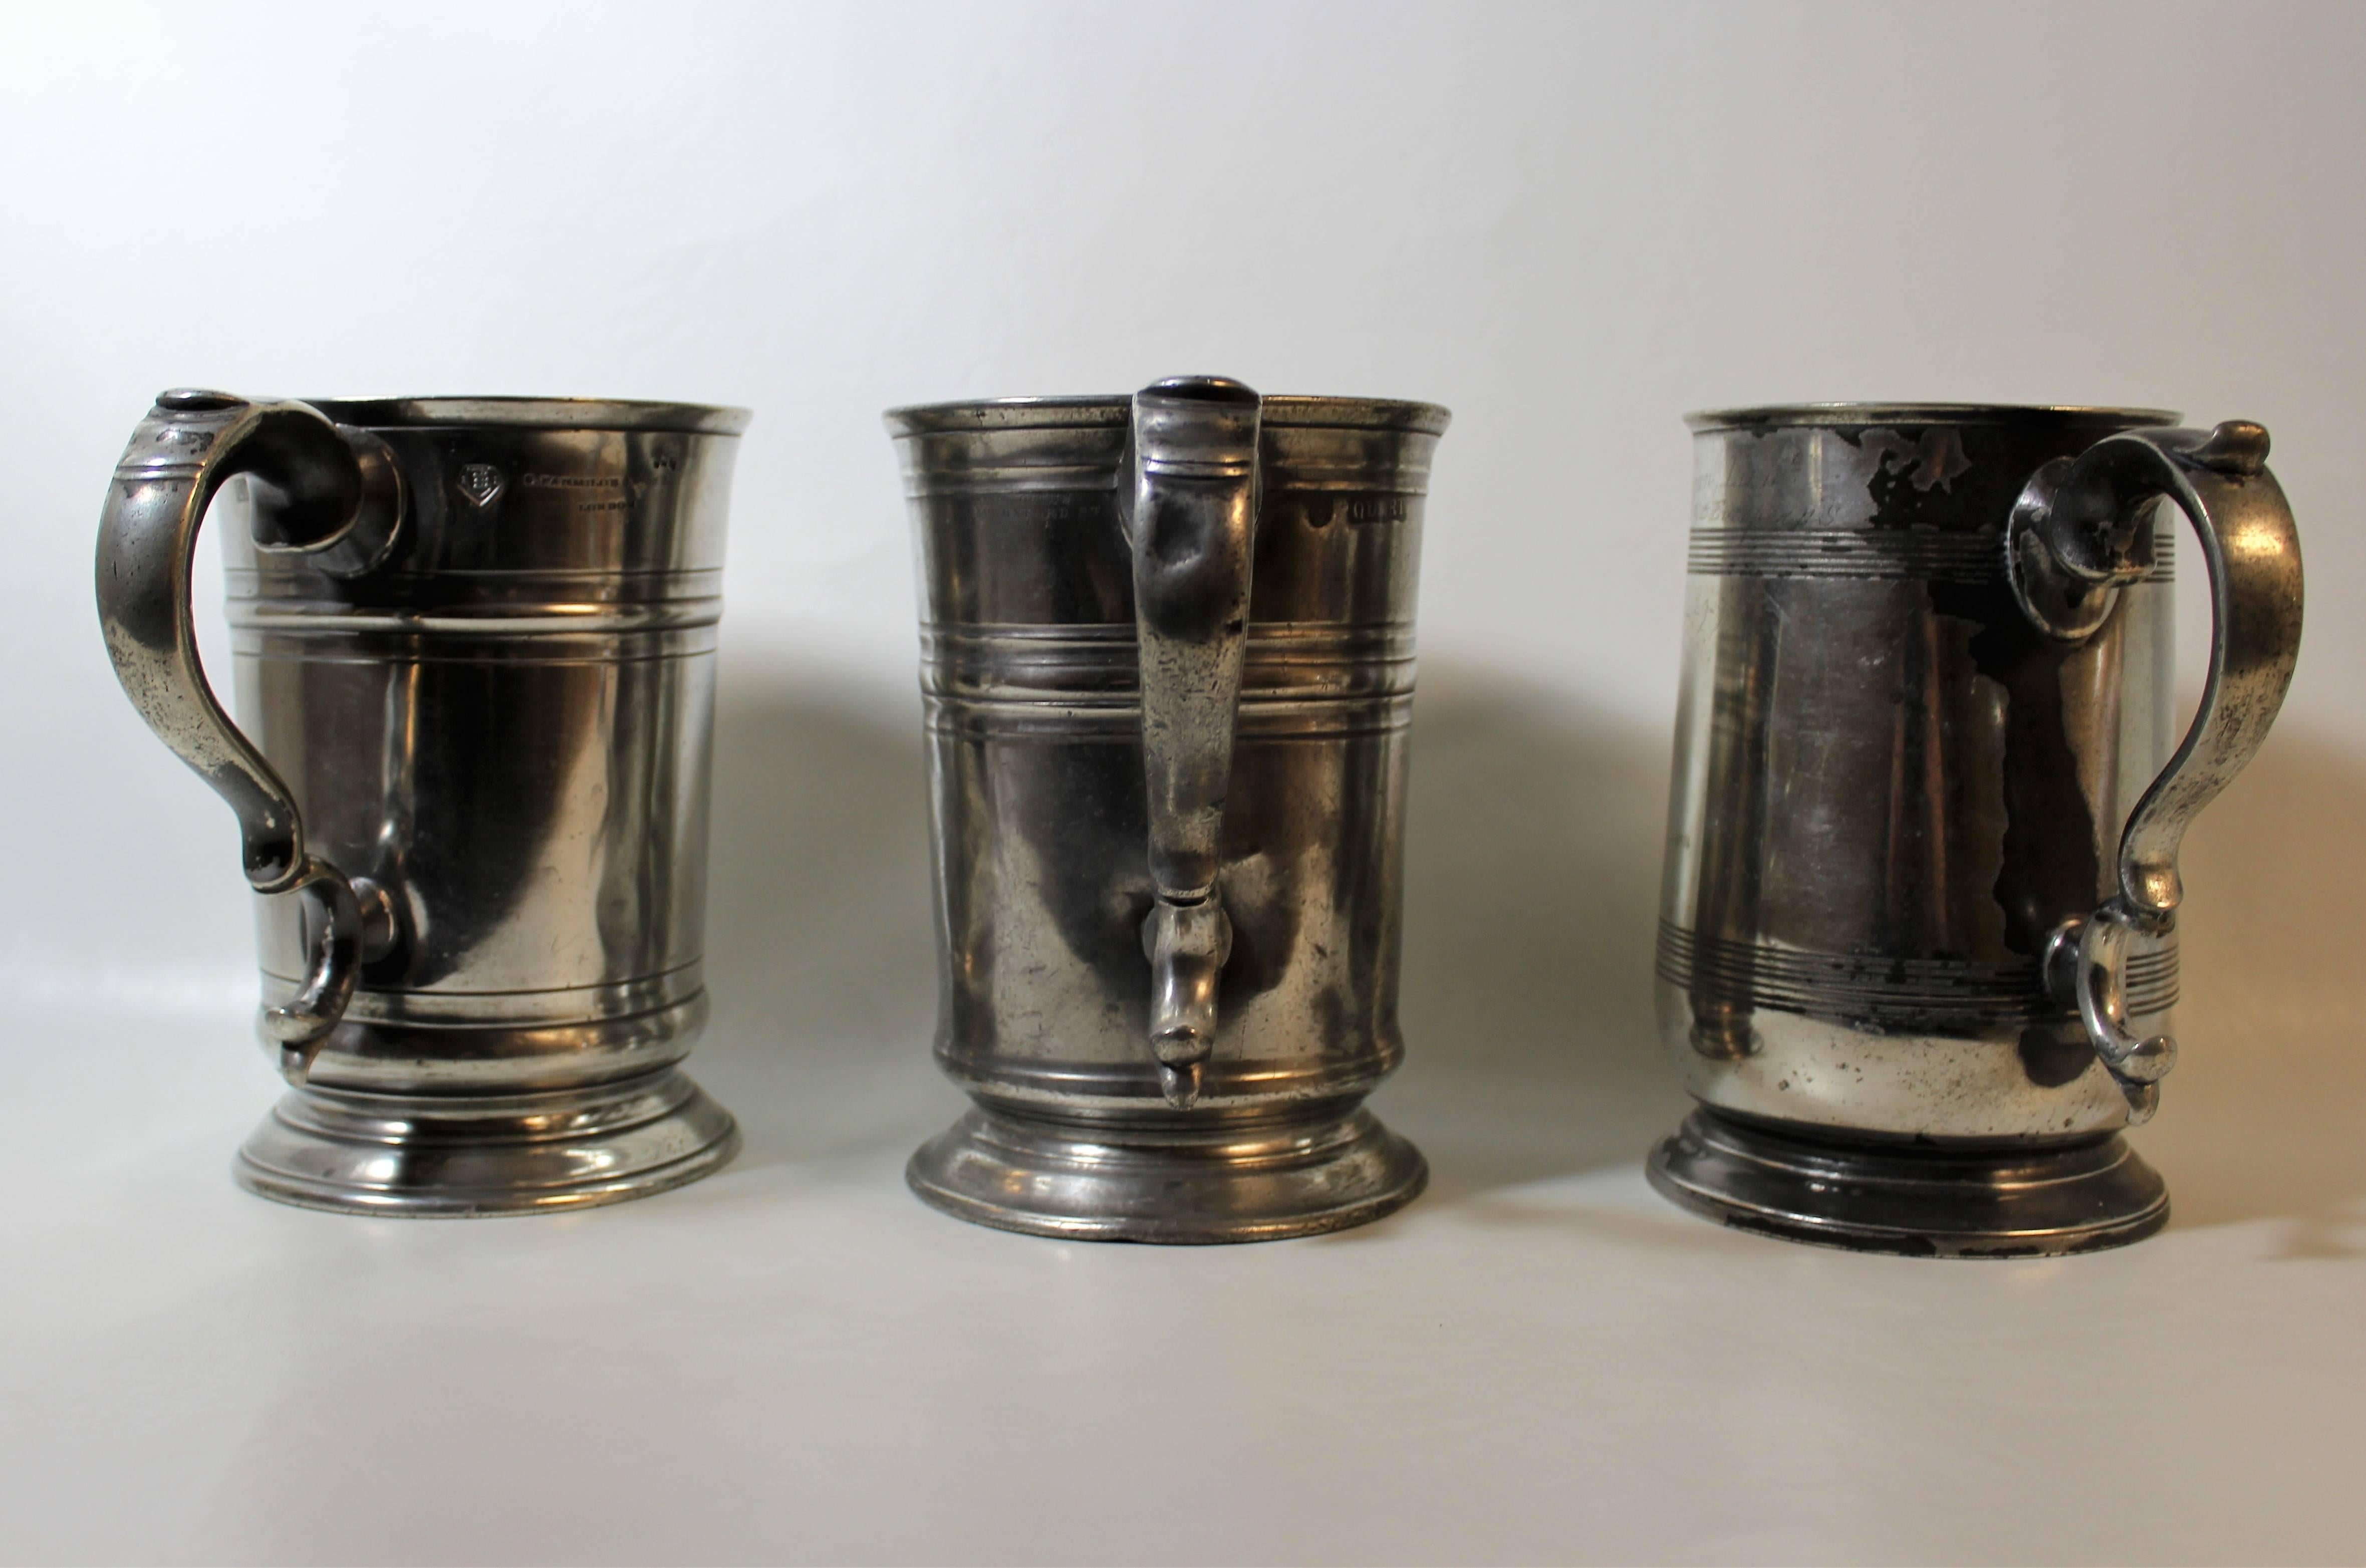 Three English pewter tankards with various engravings and marks.